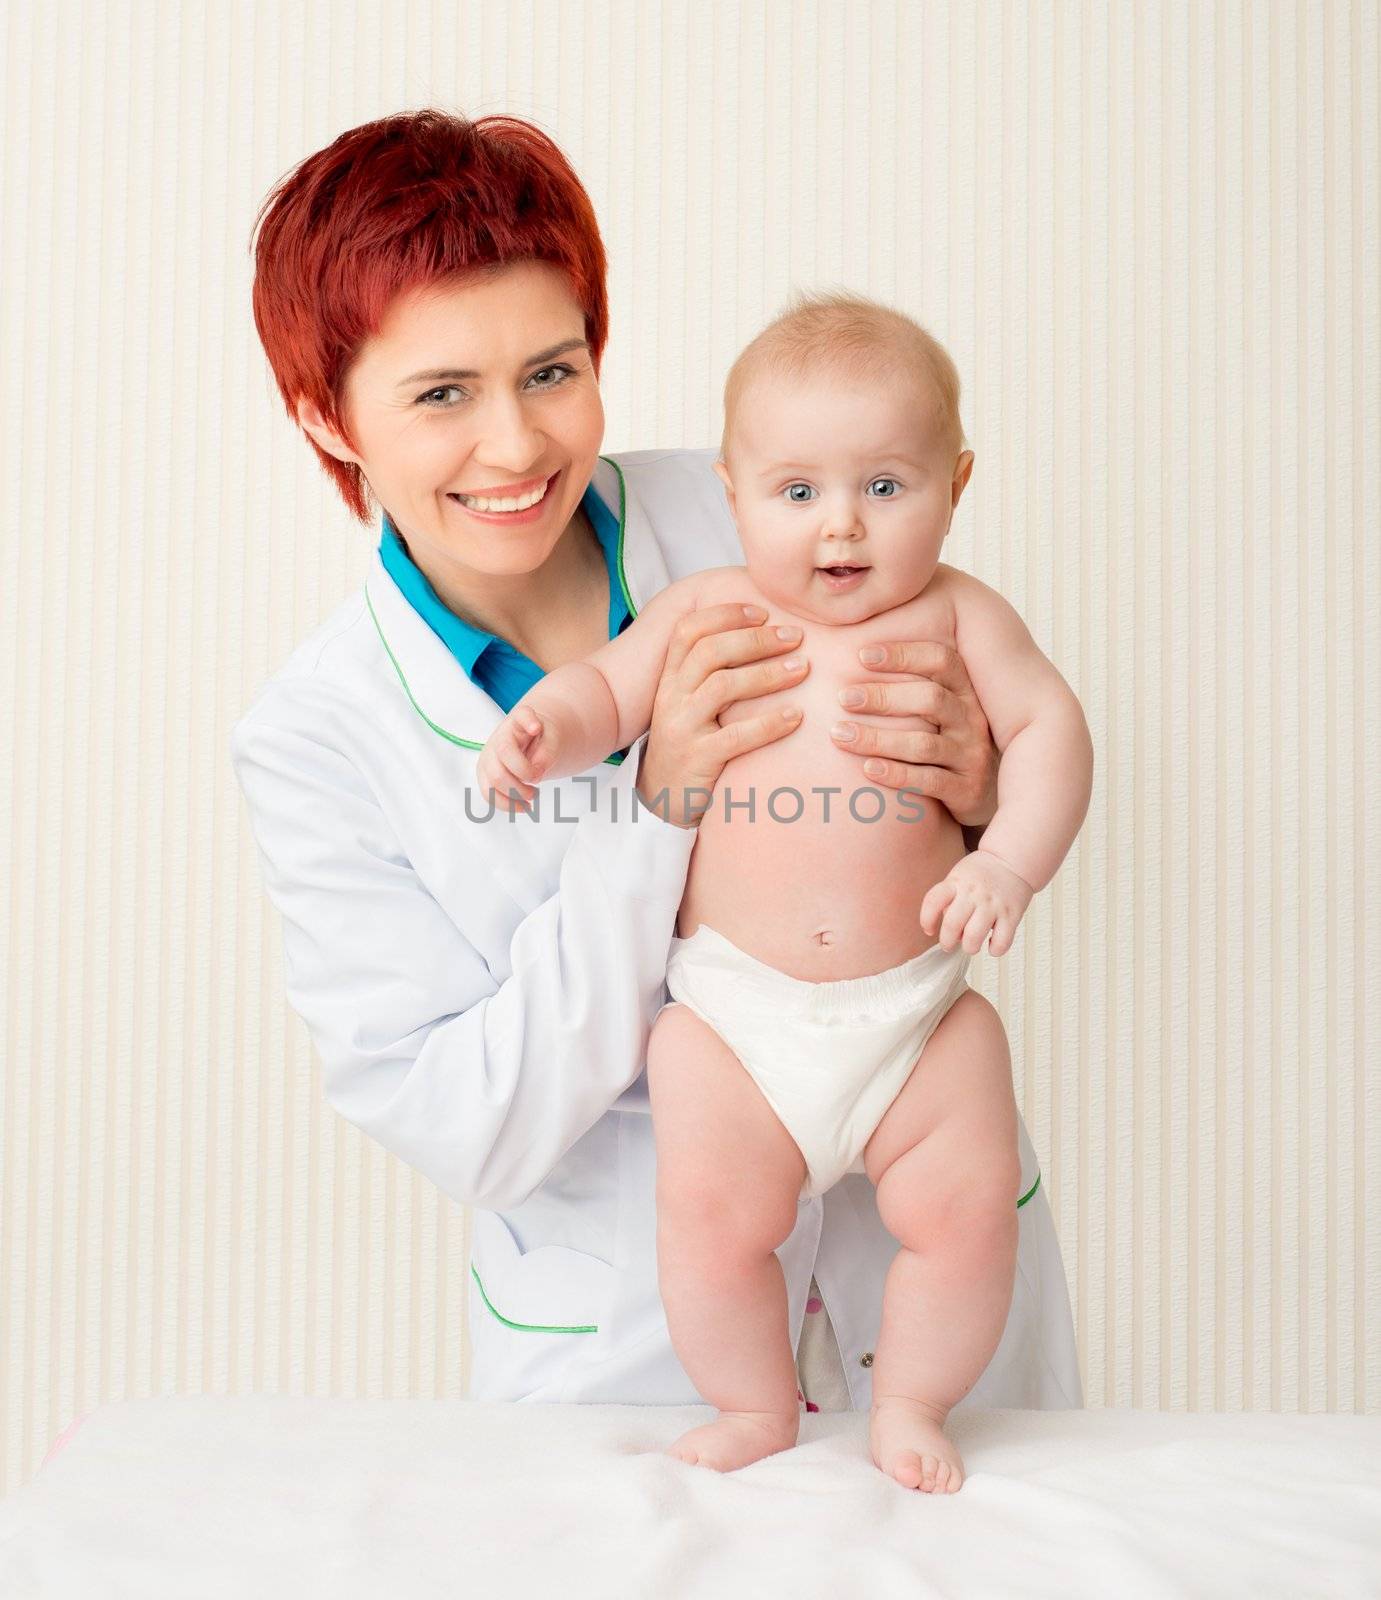 Woman doctor with beautiful baby